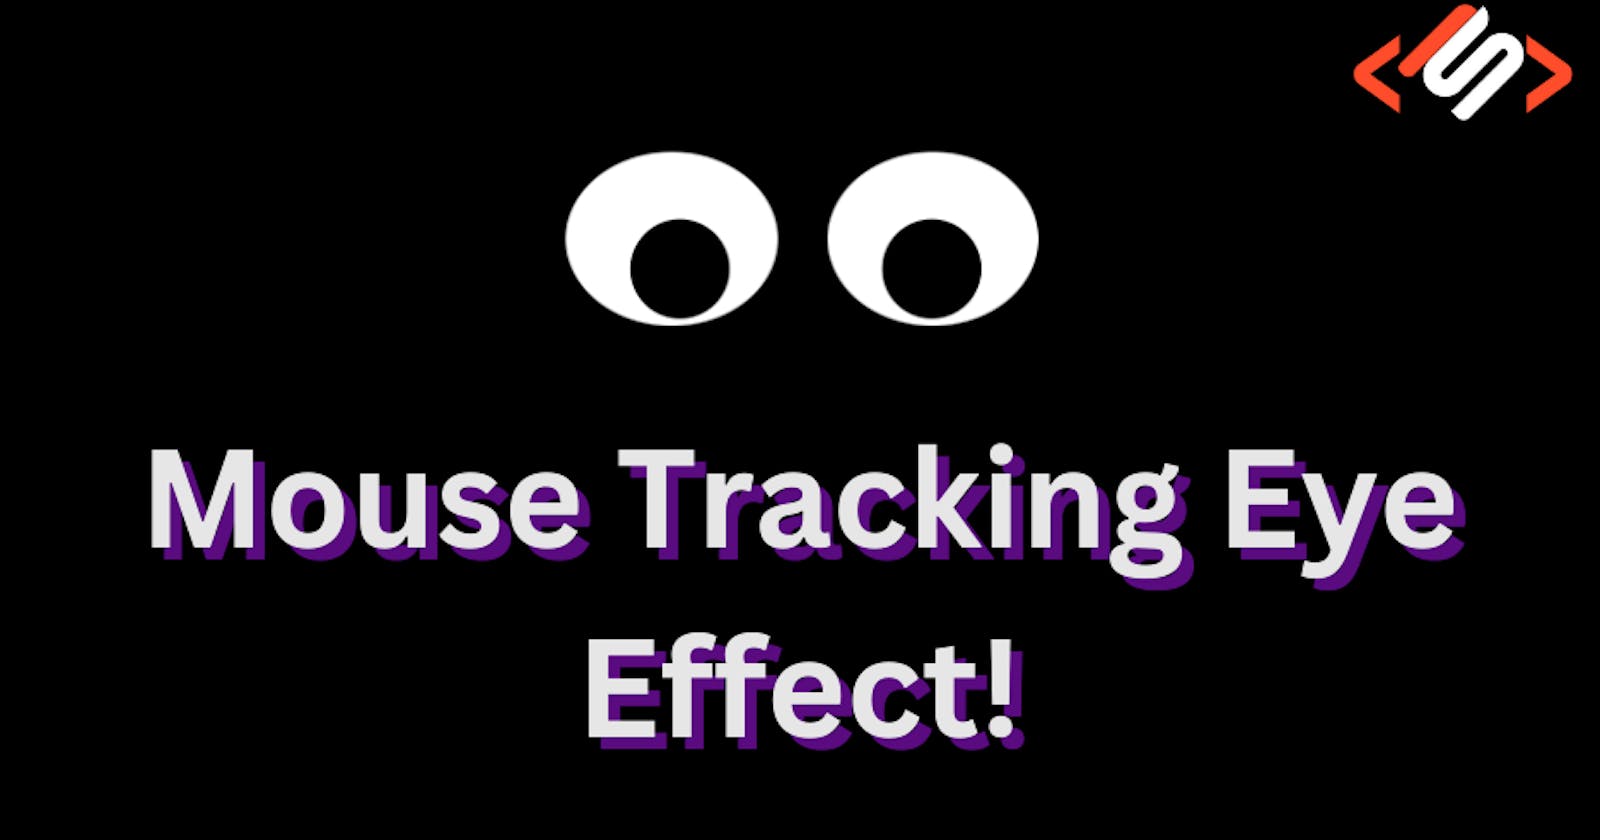 Creating a Mouse Tracking Eye Effect With JavaScript